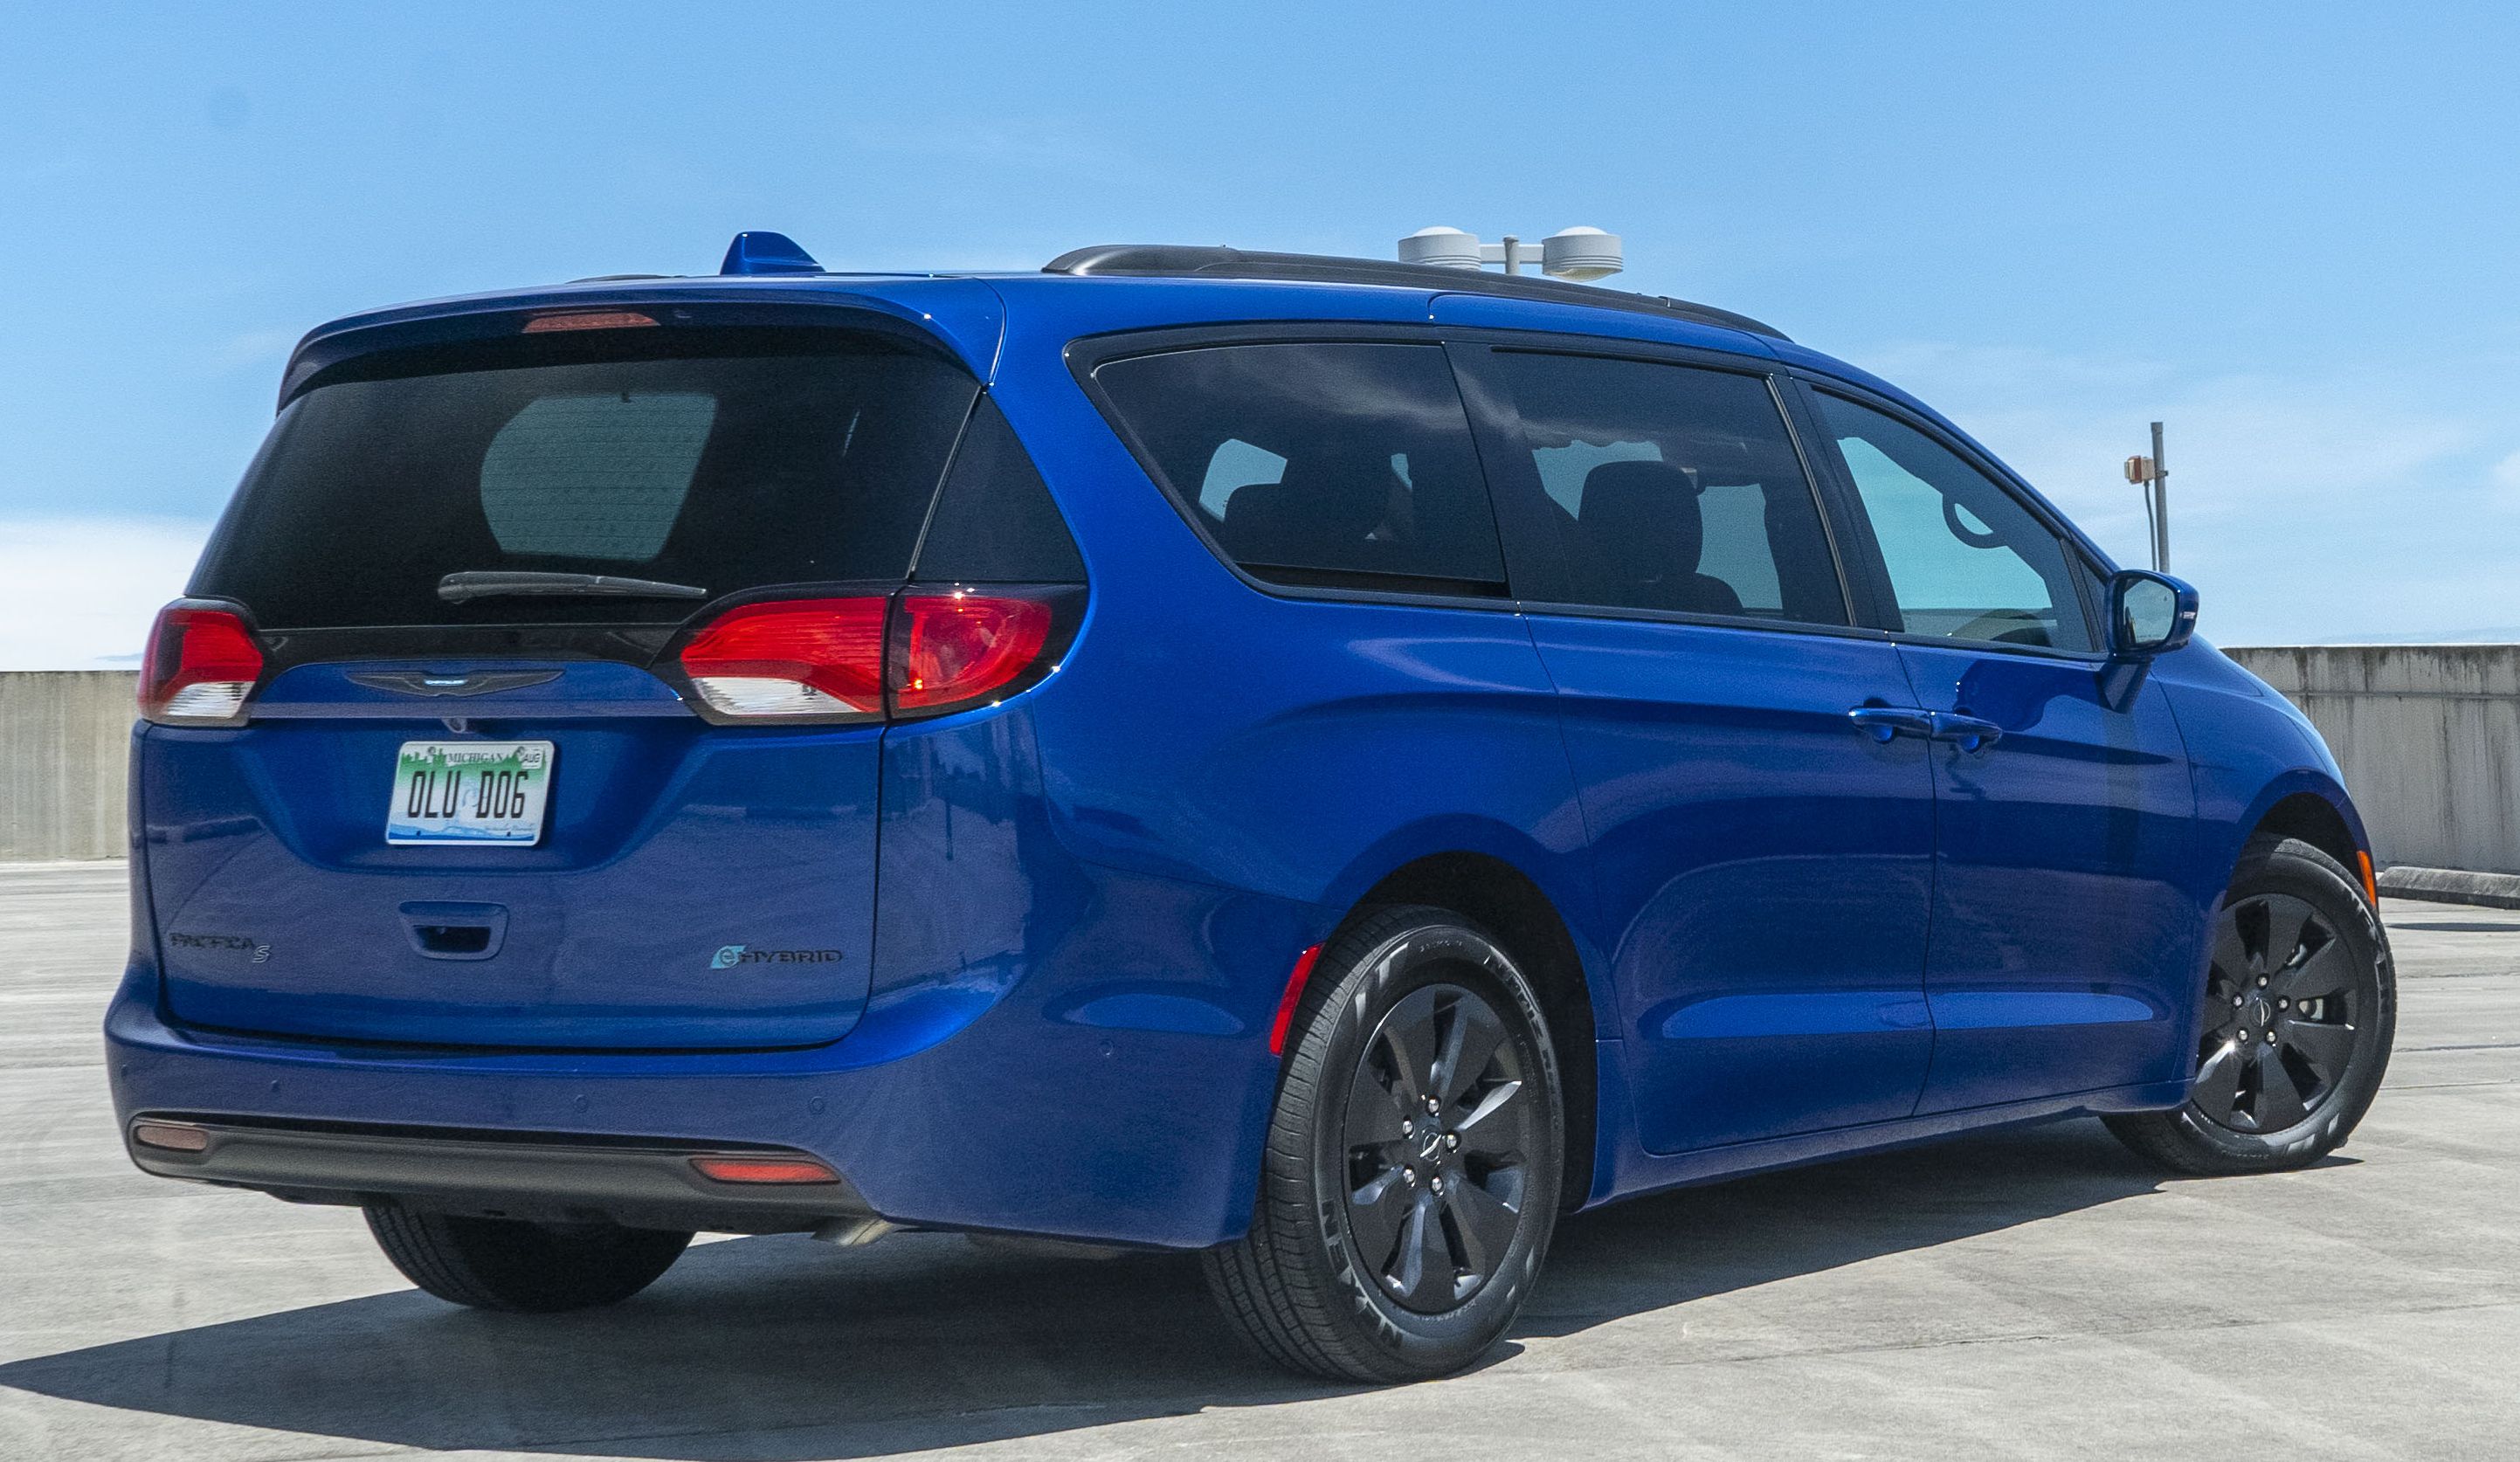 2020 Chrysler Pacifica - Driven